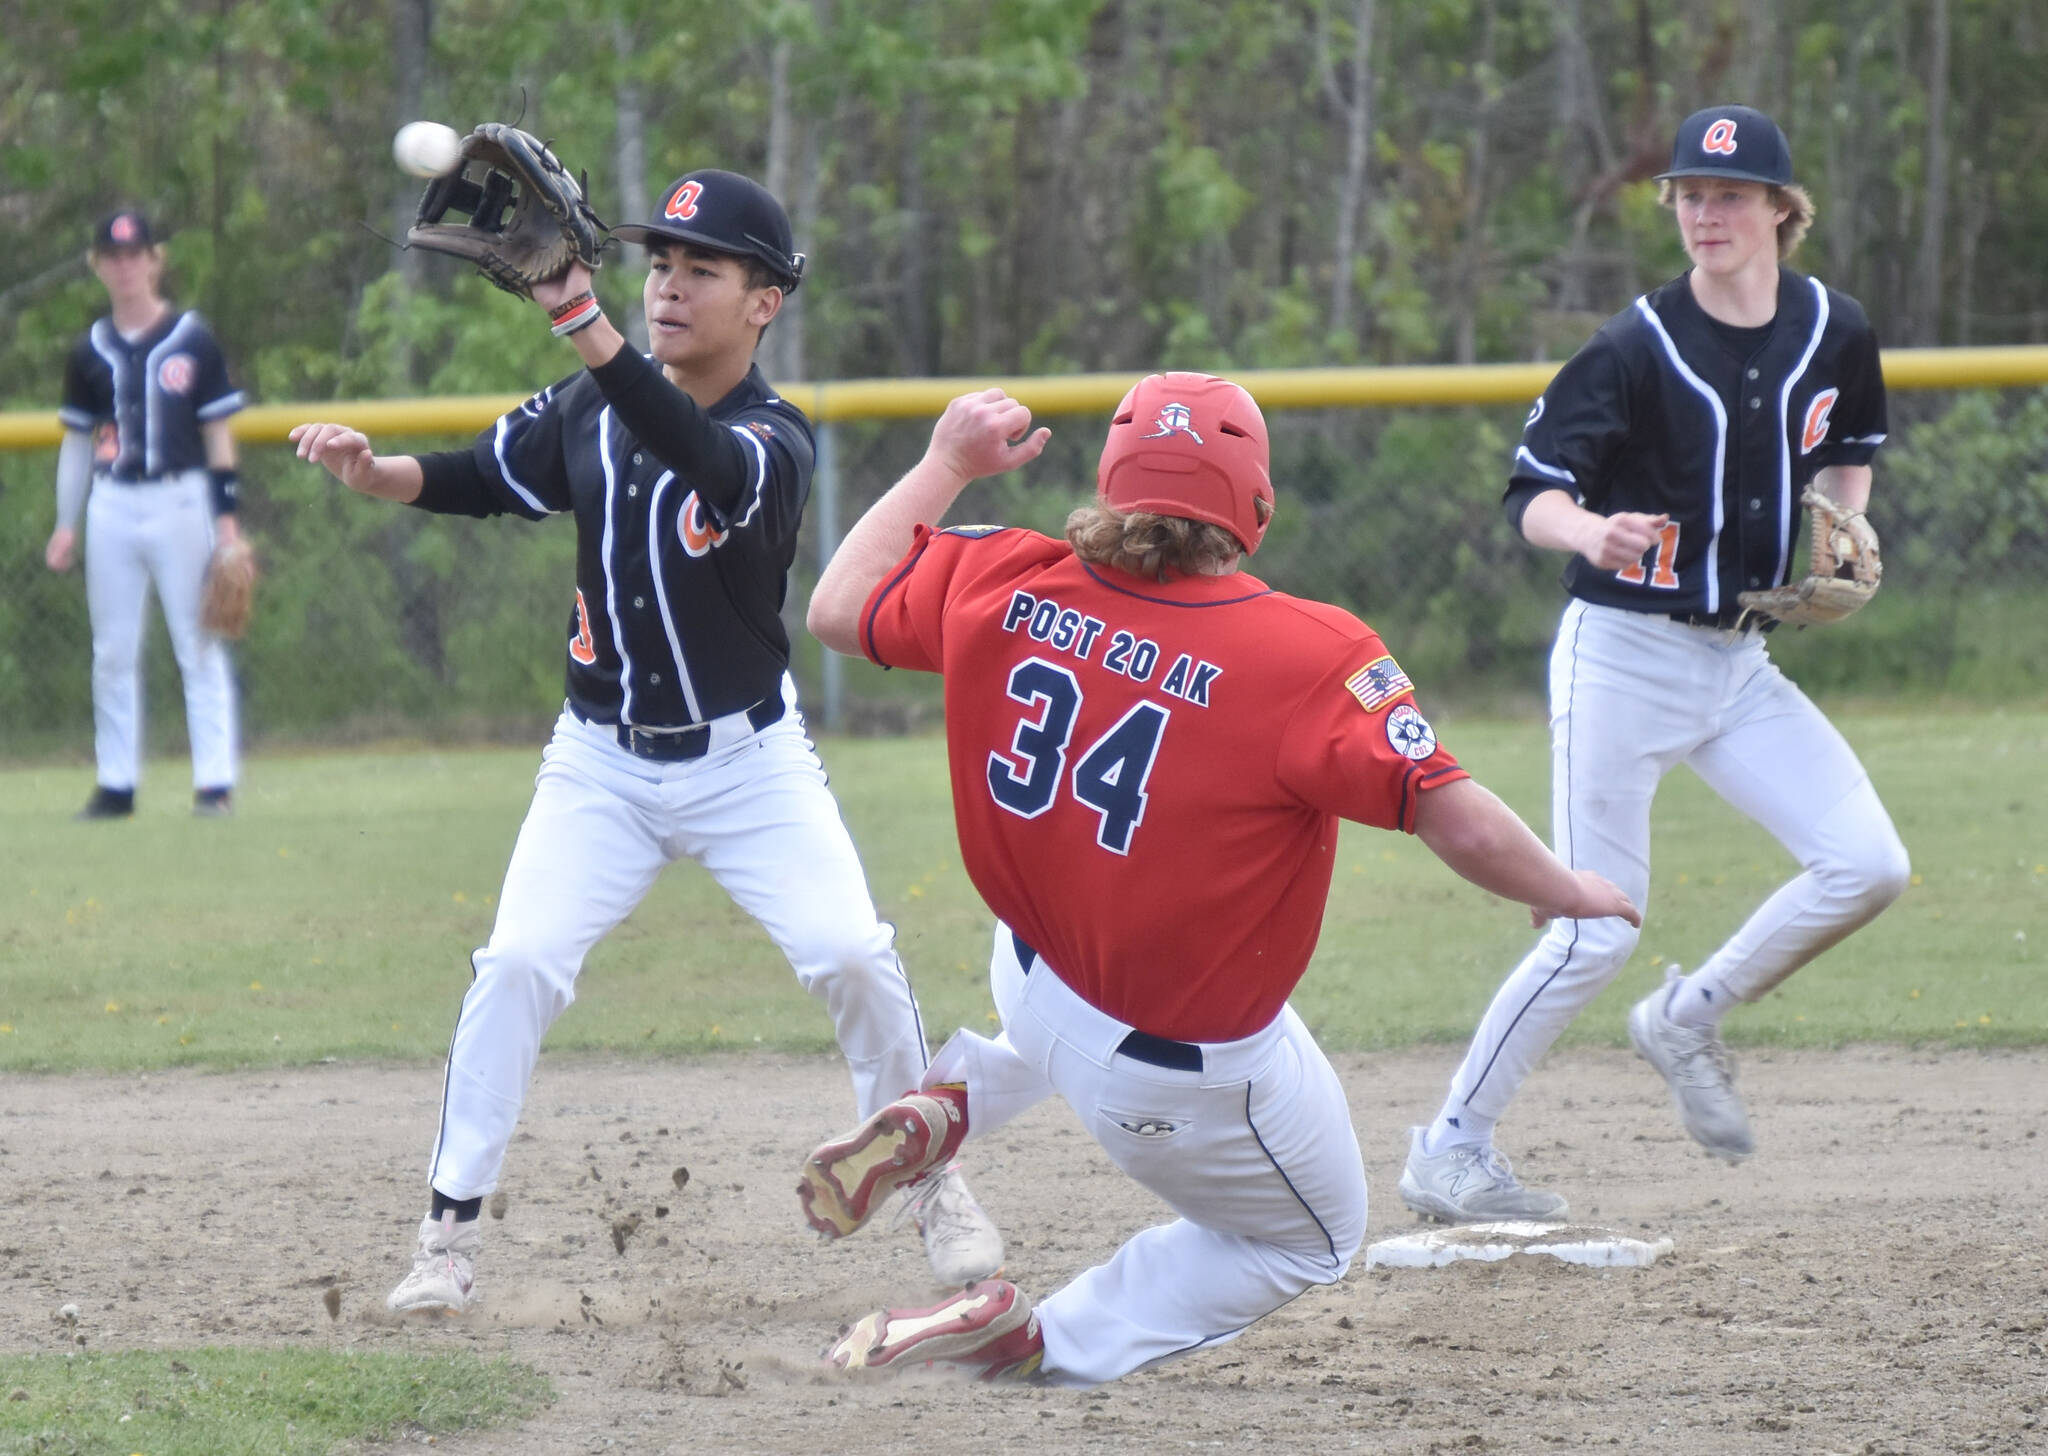 Charlie Chamberlain of the American Legion Twins beats the tag of West second baseman Orion Halliburton on Sunday, June 11, 2023, at the Soldotna Little League fields in Soldotna, Alaska. (Photo by Jeff Helminiak/Peninsula Clarion)